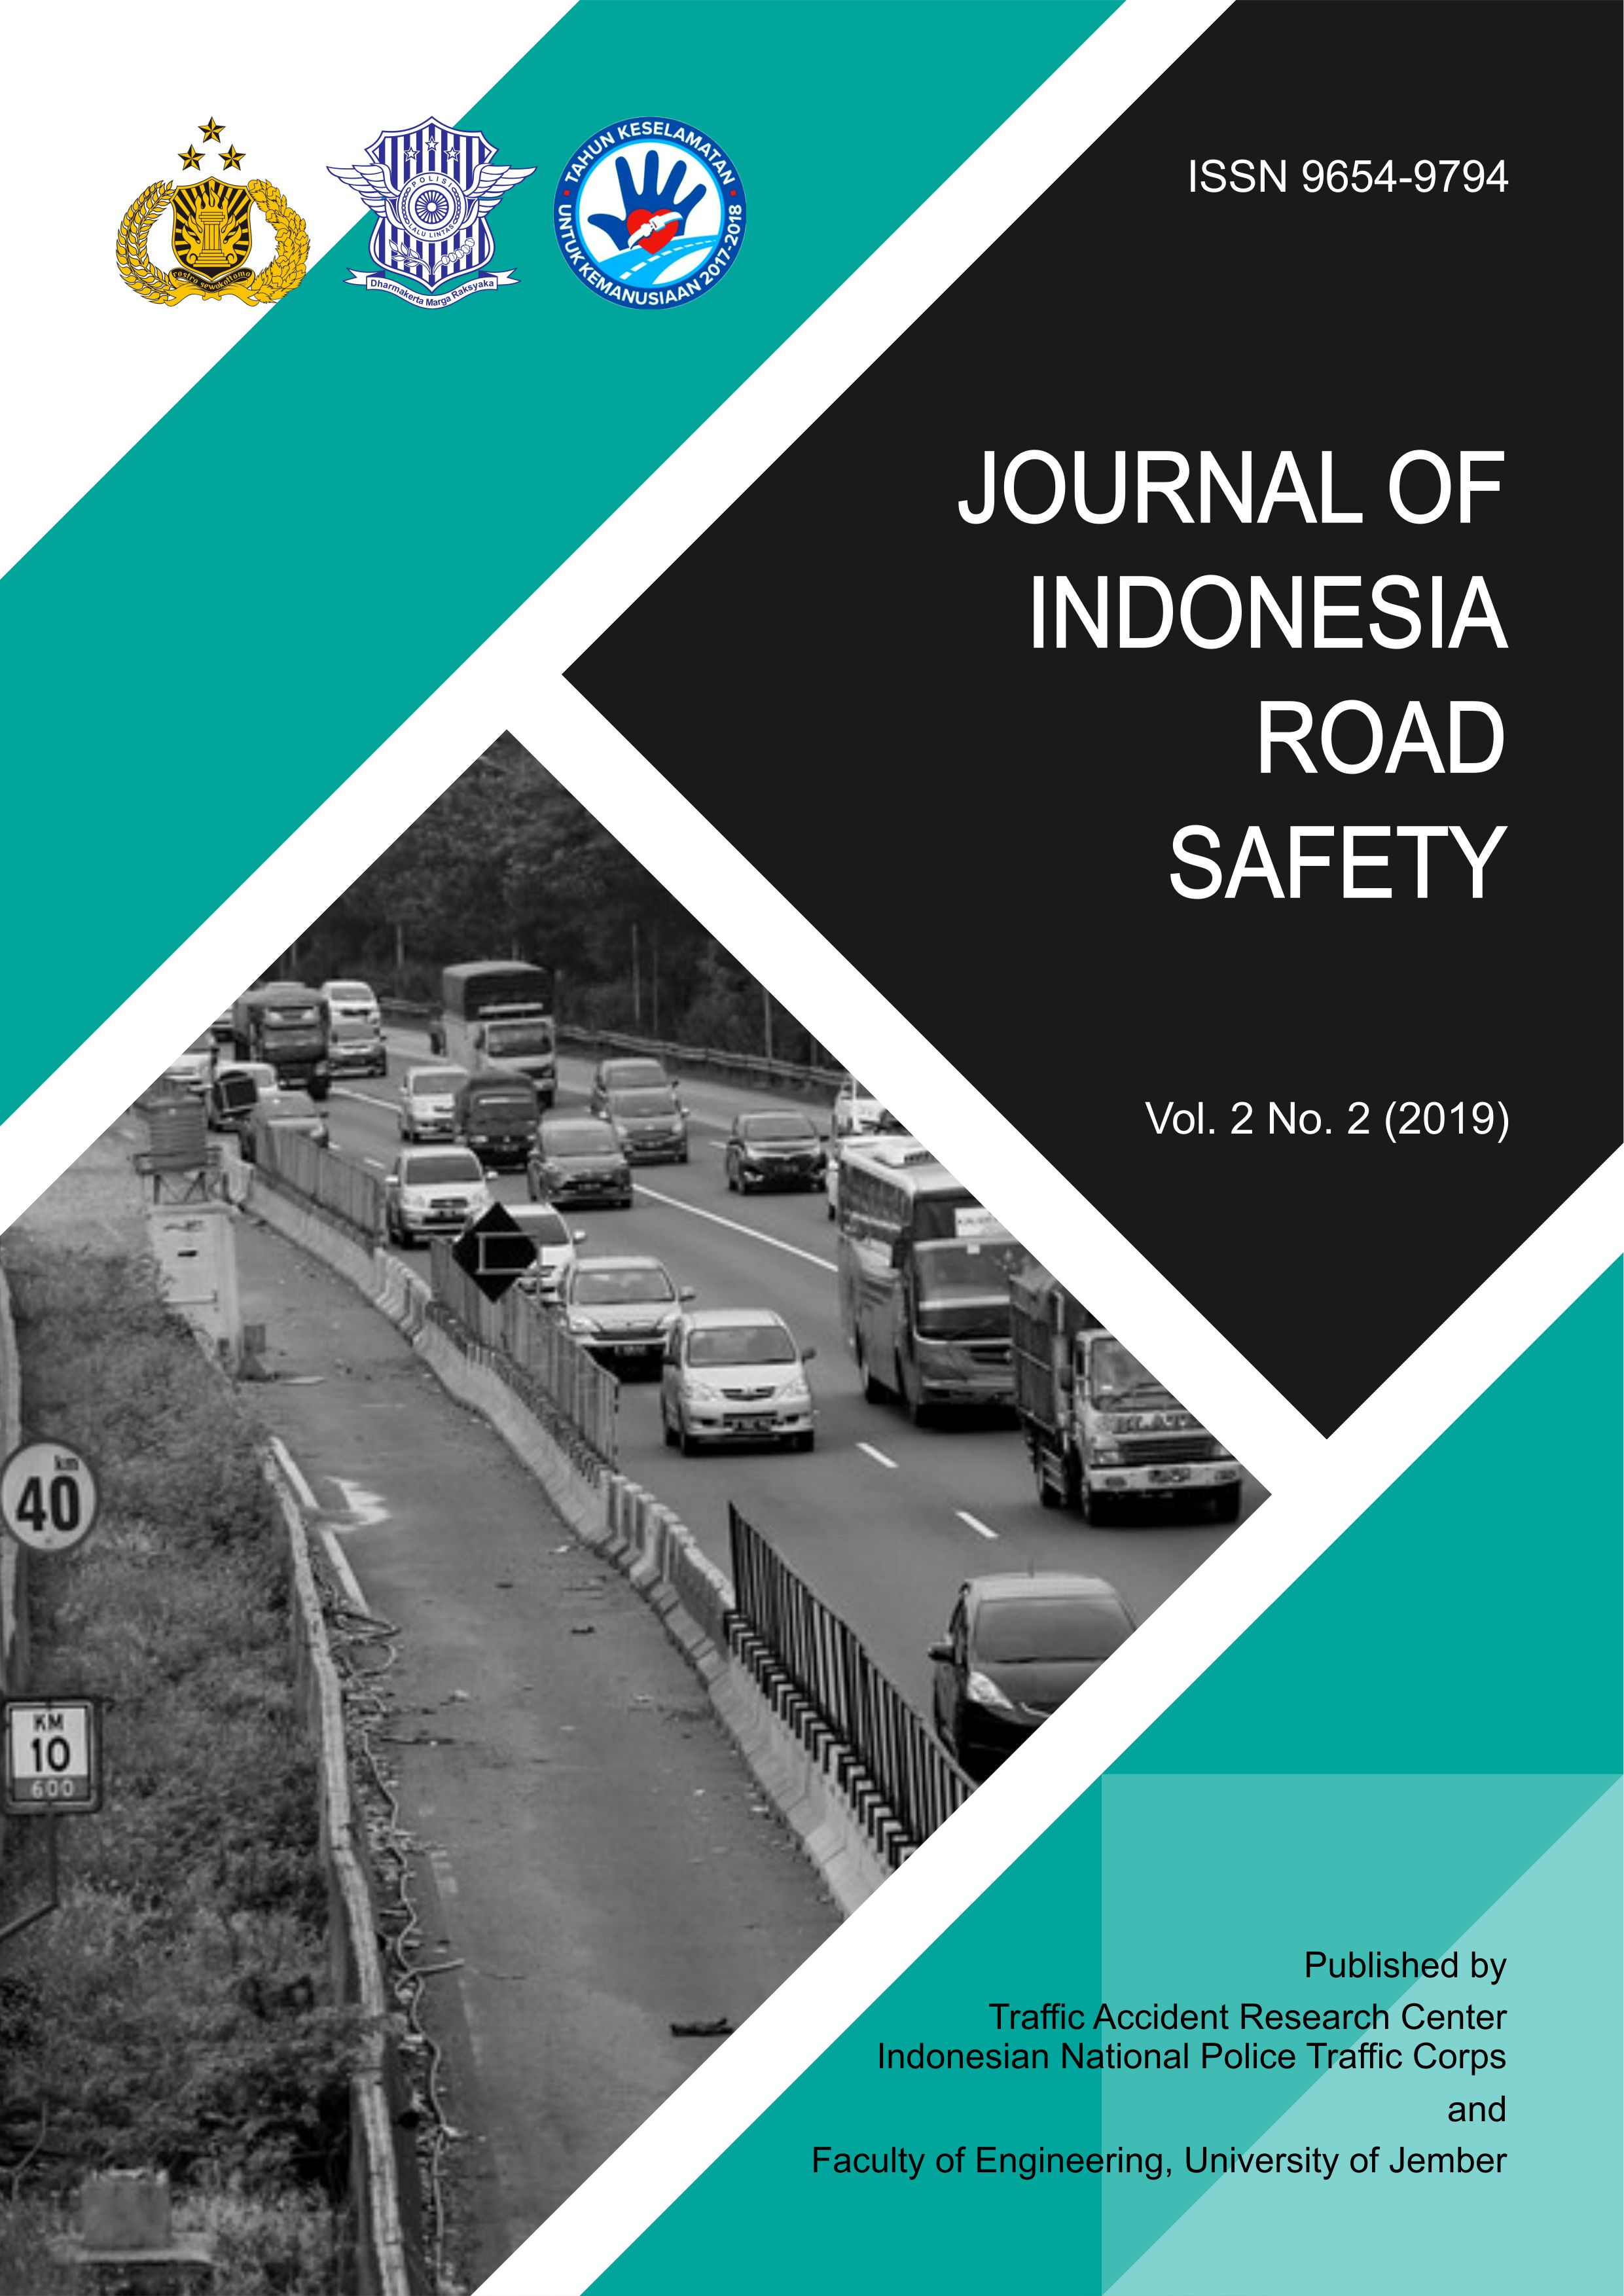 Published by Traffic Accident Research Center (TARC), Indonesian National Traffic Corps and Faculty of Engineering, University of Jember